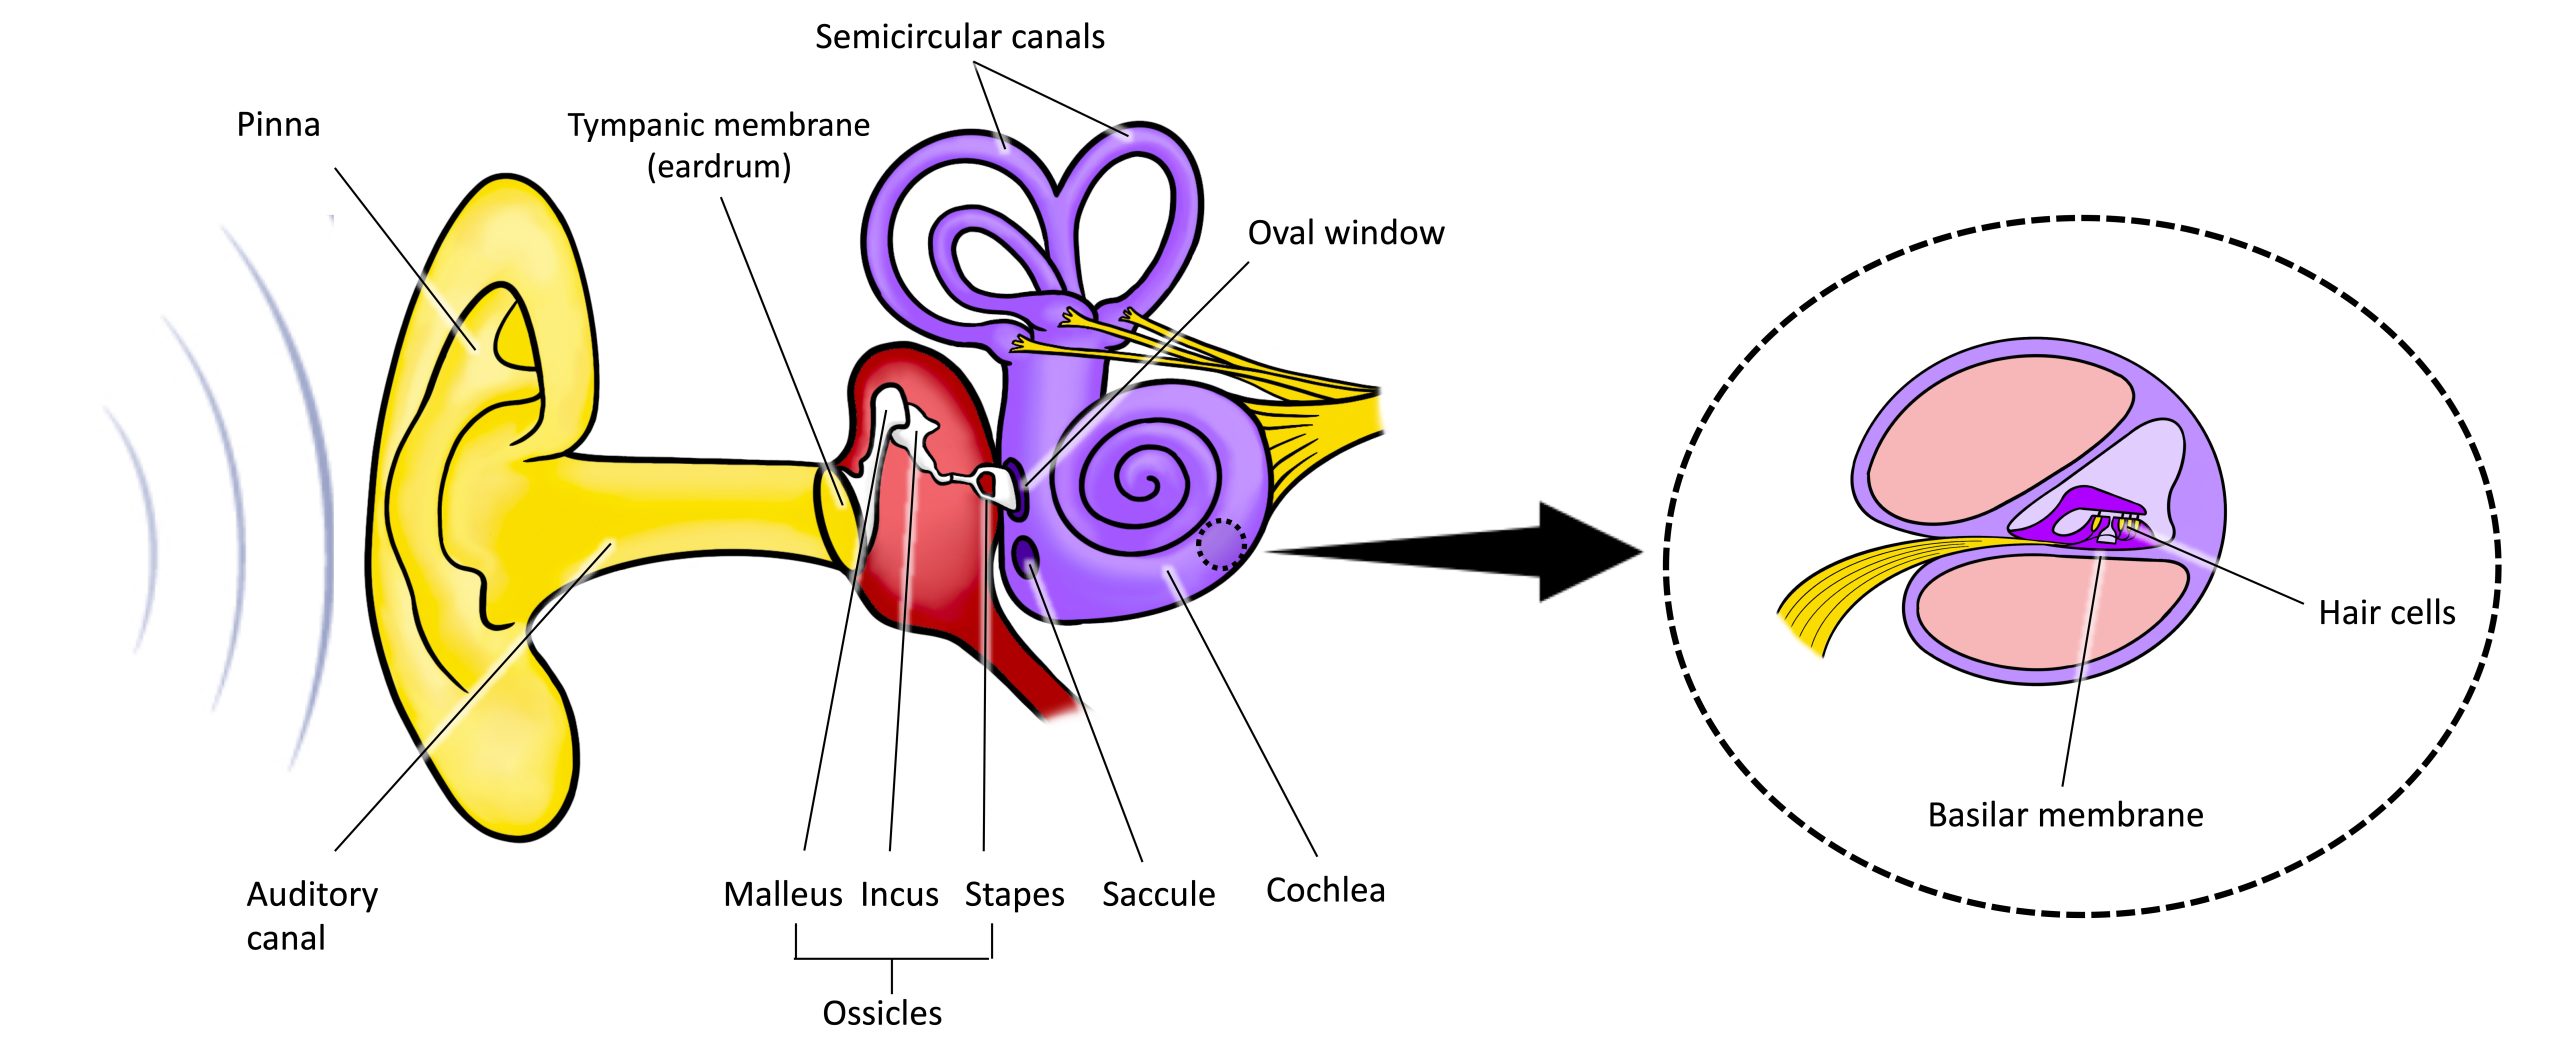 An illustration shows sound waves entering the “auditory canal” and traveling to the inner ear. The locations of the “pinna,” “tympanic membrane (eardrum)” are labeled, as well as parts of the inner ear: the “ossicles” and its subparts, the “malleus,” “incus,” and “stapes.” A close-up illustration of the inner ear that shows the locations of the “semicircular canals,” “oval window,” “saccule,” and “cochlea”. A callout window shows the “basilar membrane" and "hair cells.”